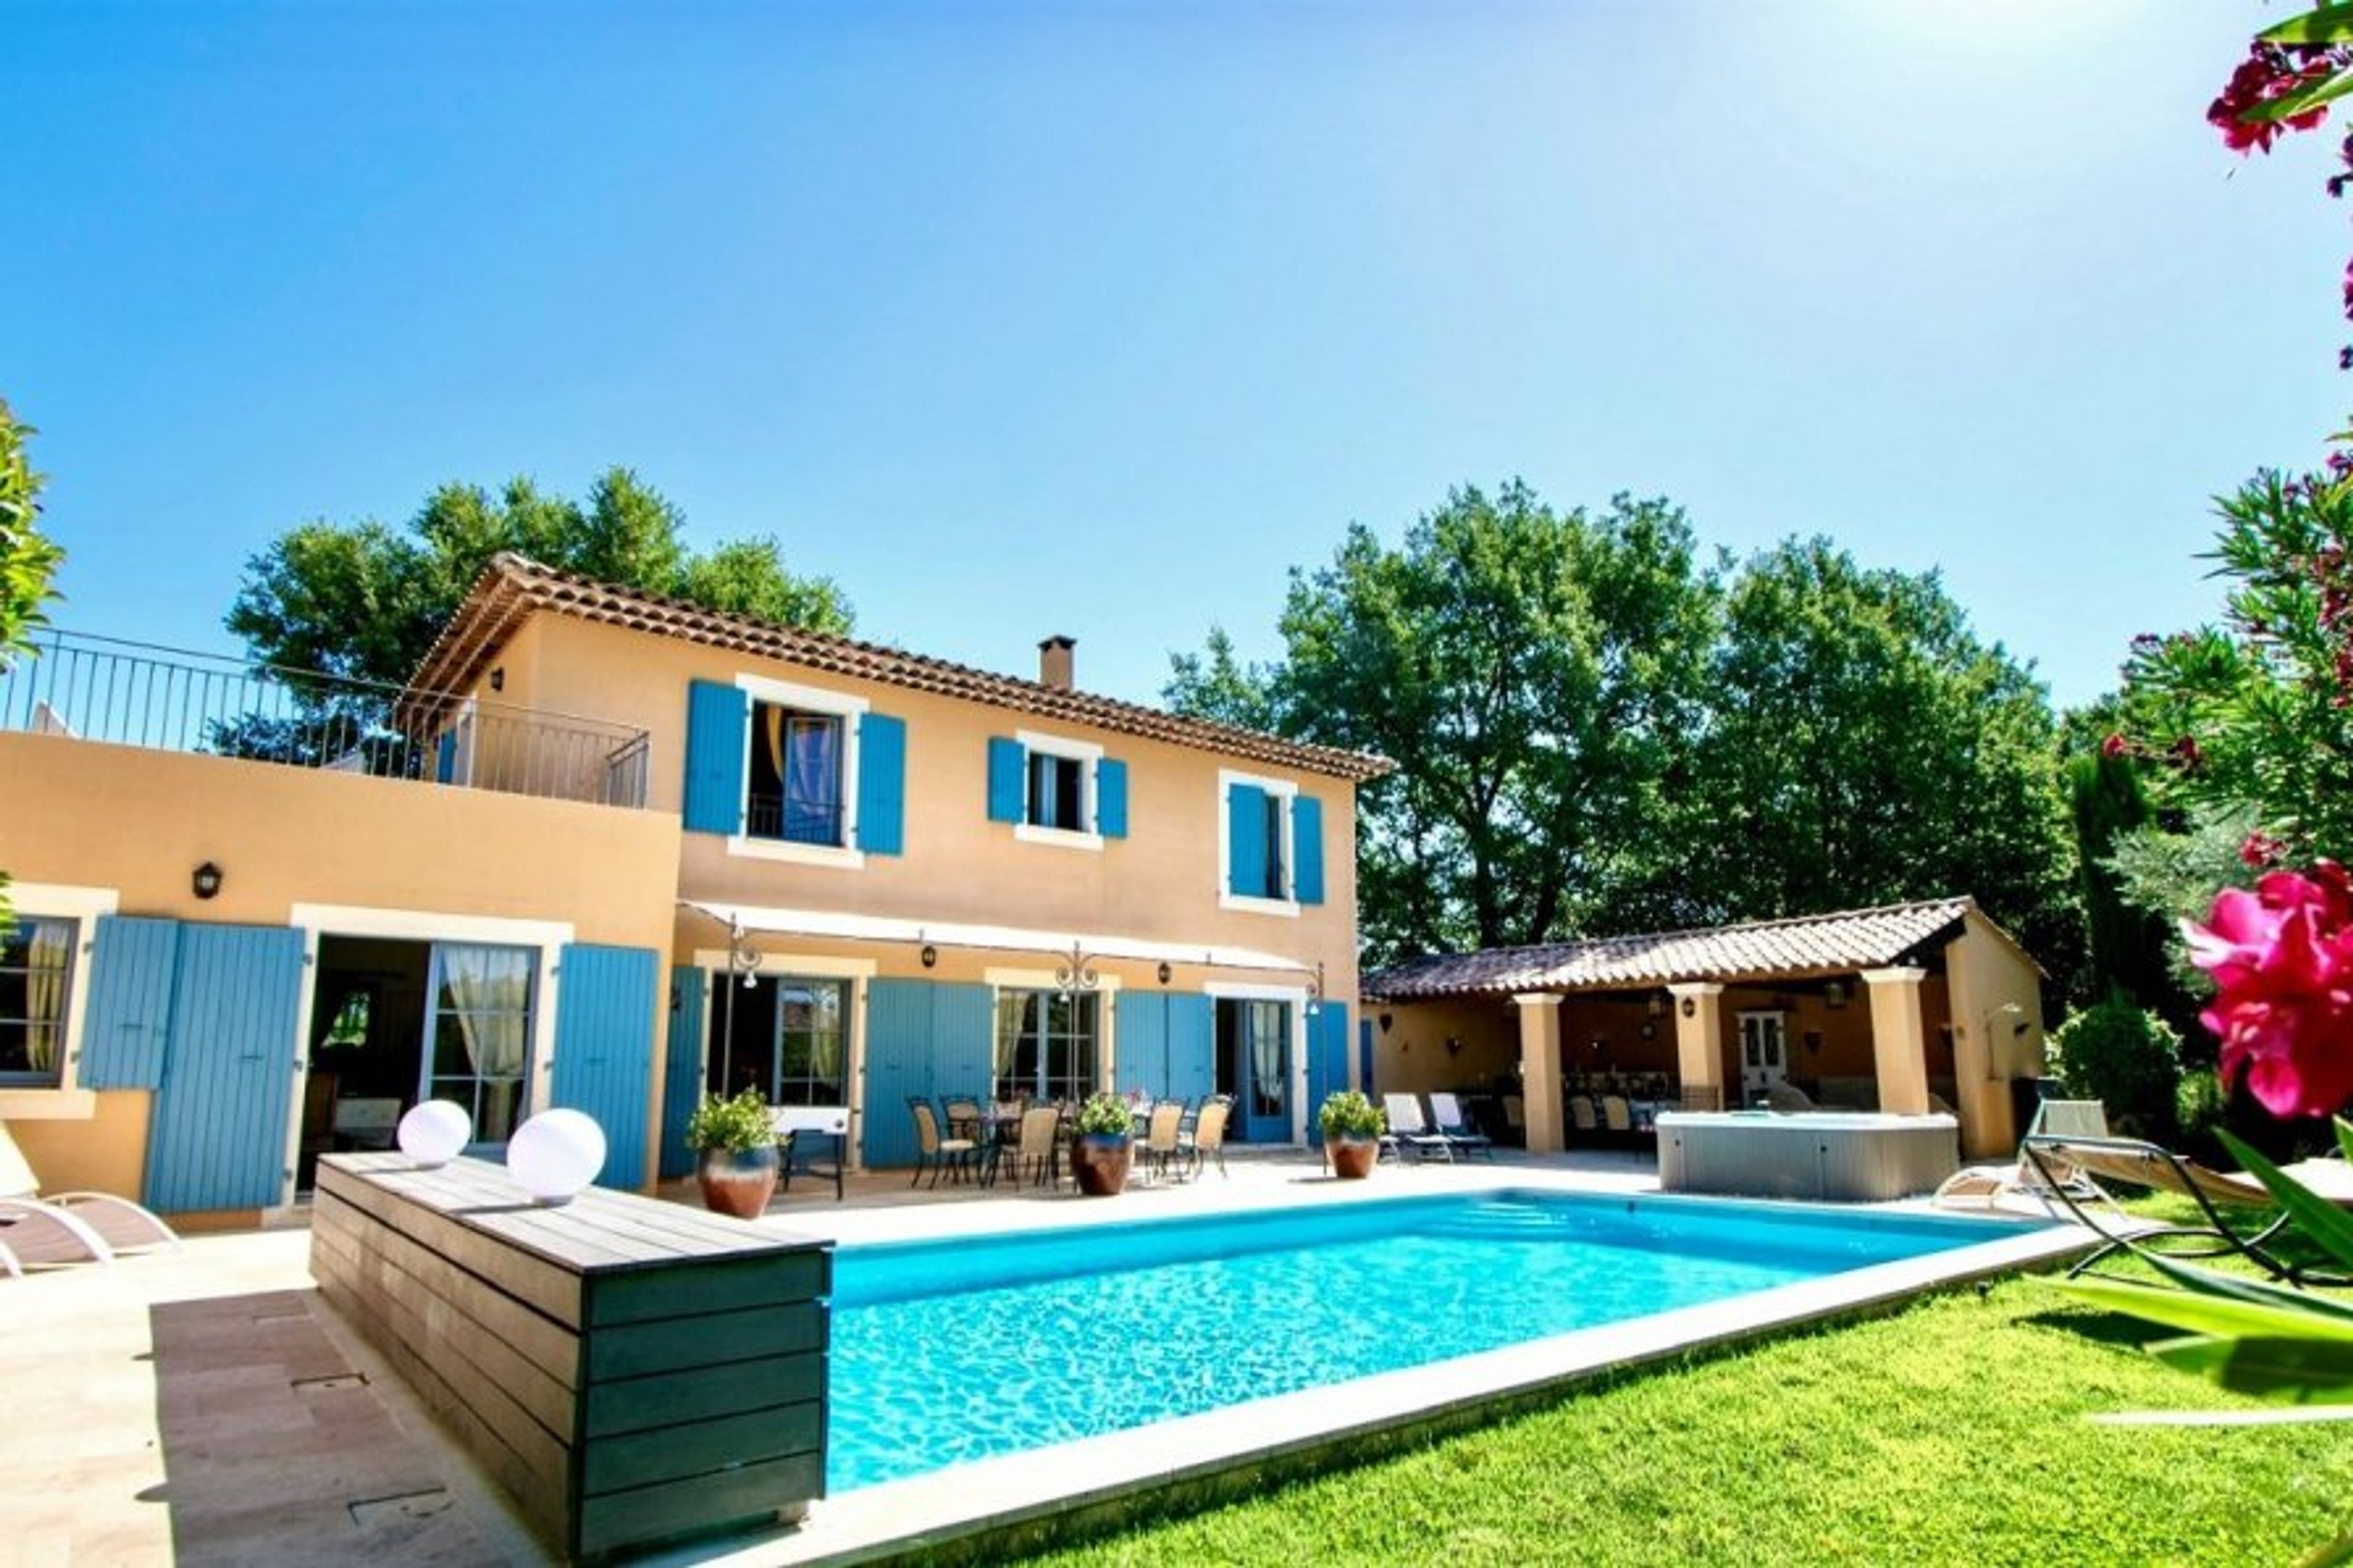 Villa with private pool. hot tub, large terrace and summer kitchen.